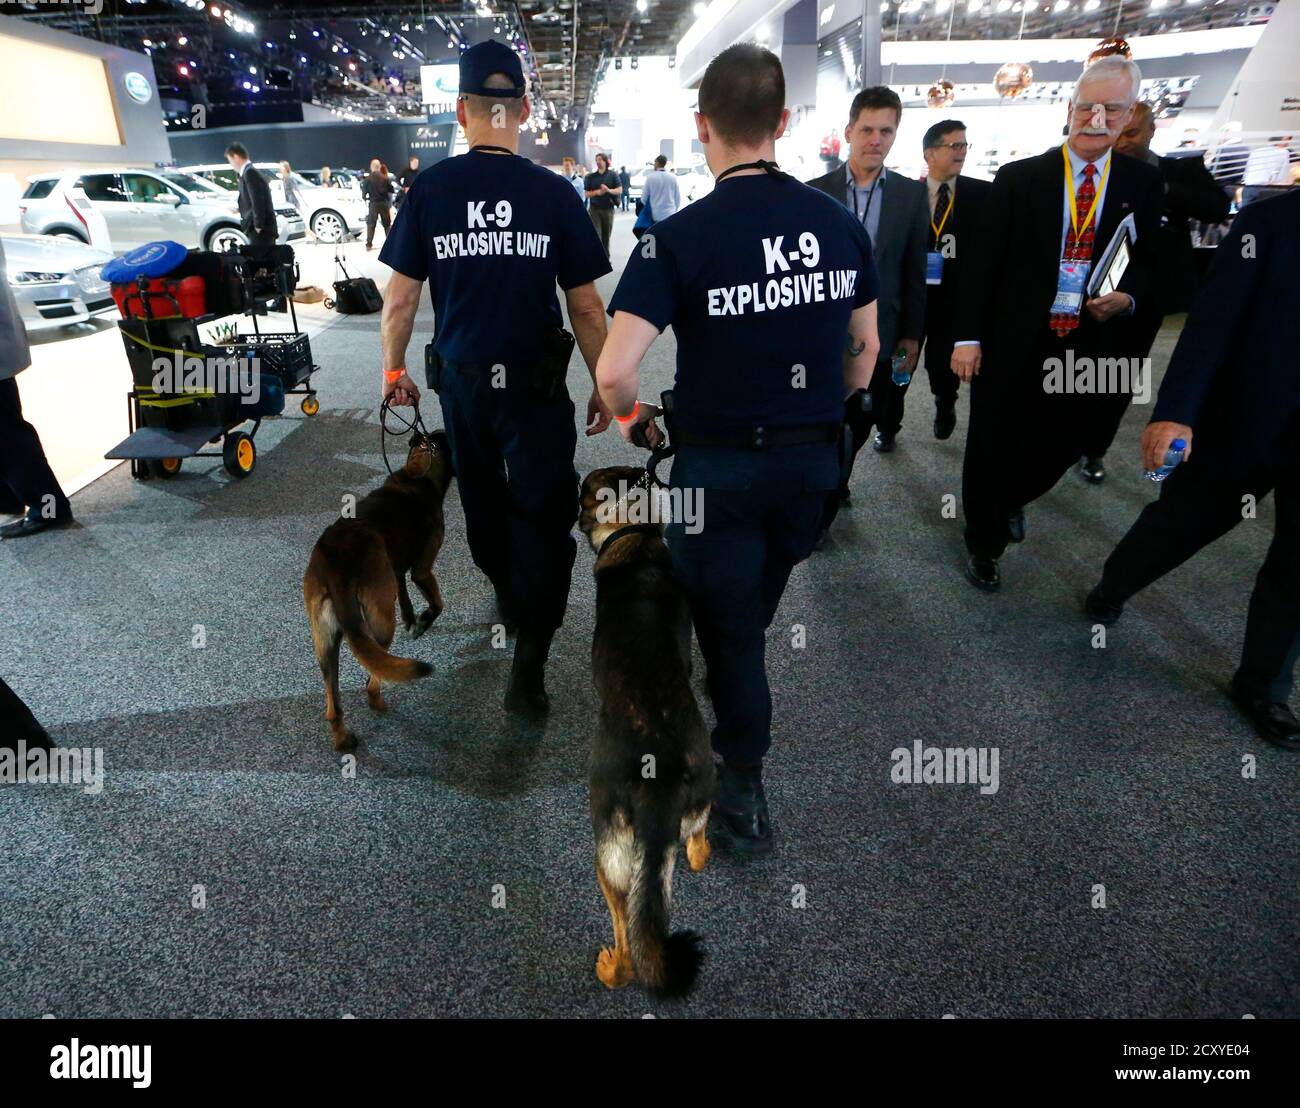 Two police officers guide bomb-sniffing dogs past exhibits during the second press day of the North American International Auto Show in Detroit, Michigan, January 13, 2015.   REUTERS/Mark Blinch (UNITED STATES - Tags: TRANSPORT BUSINESS CRIME LAW) Stock Photo